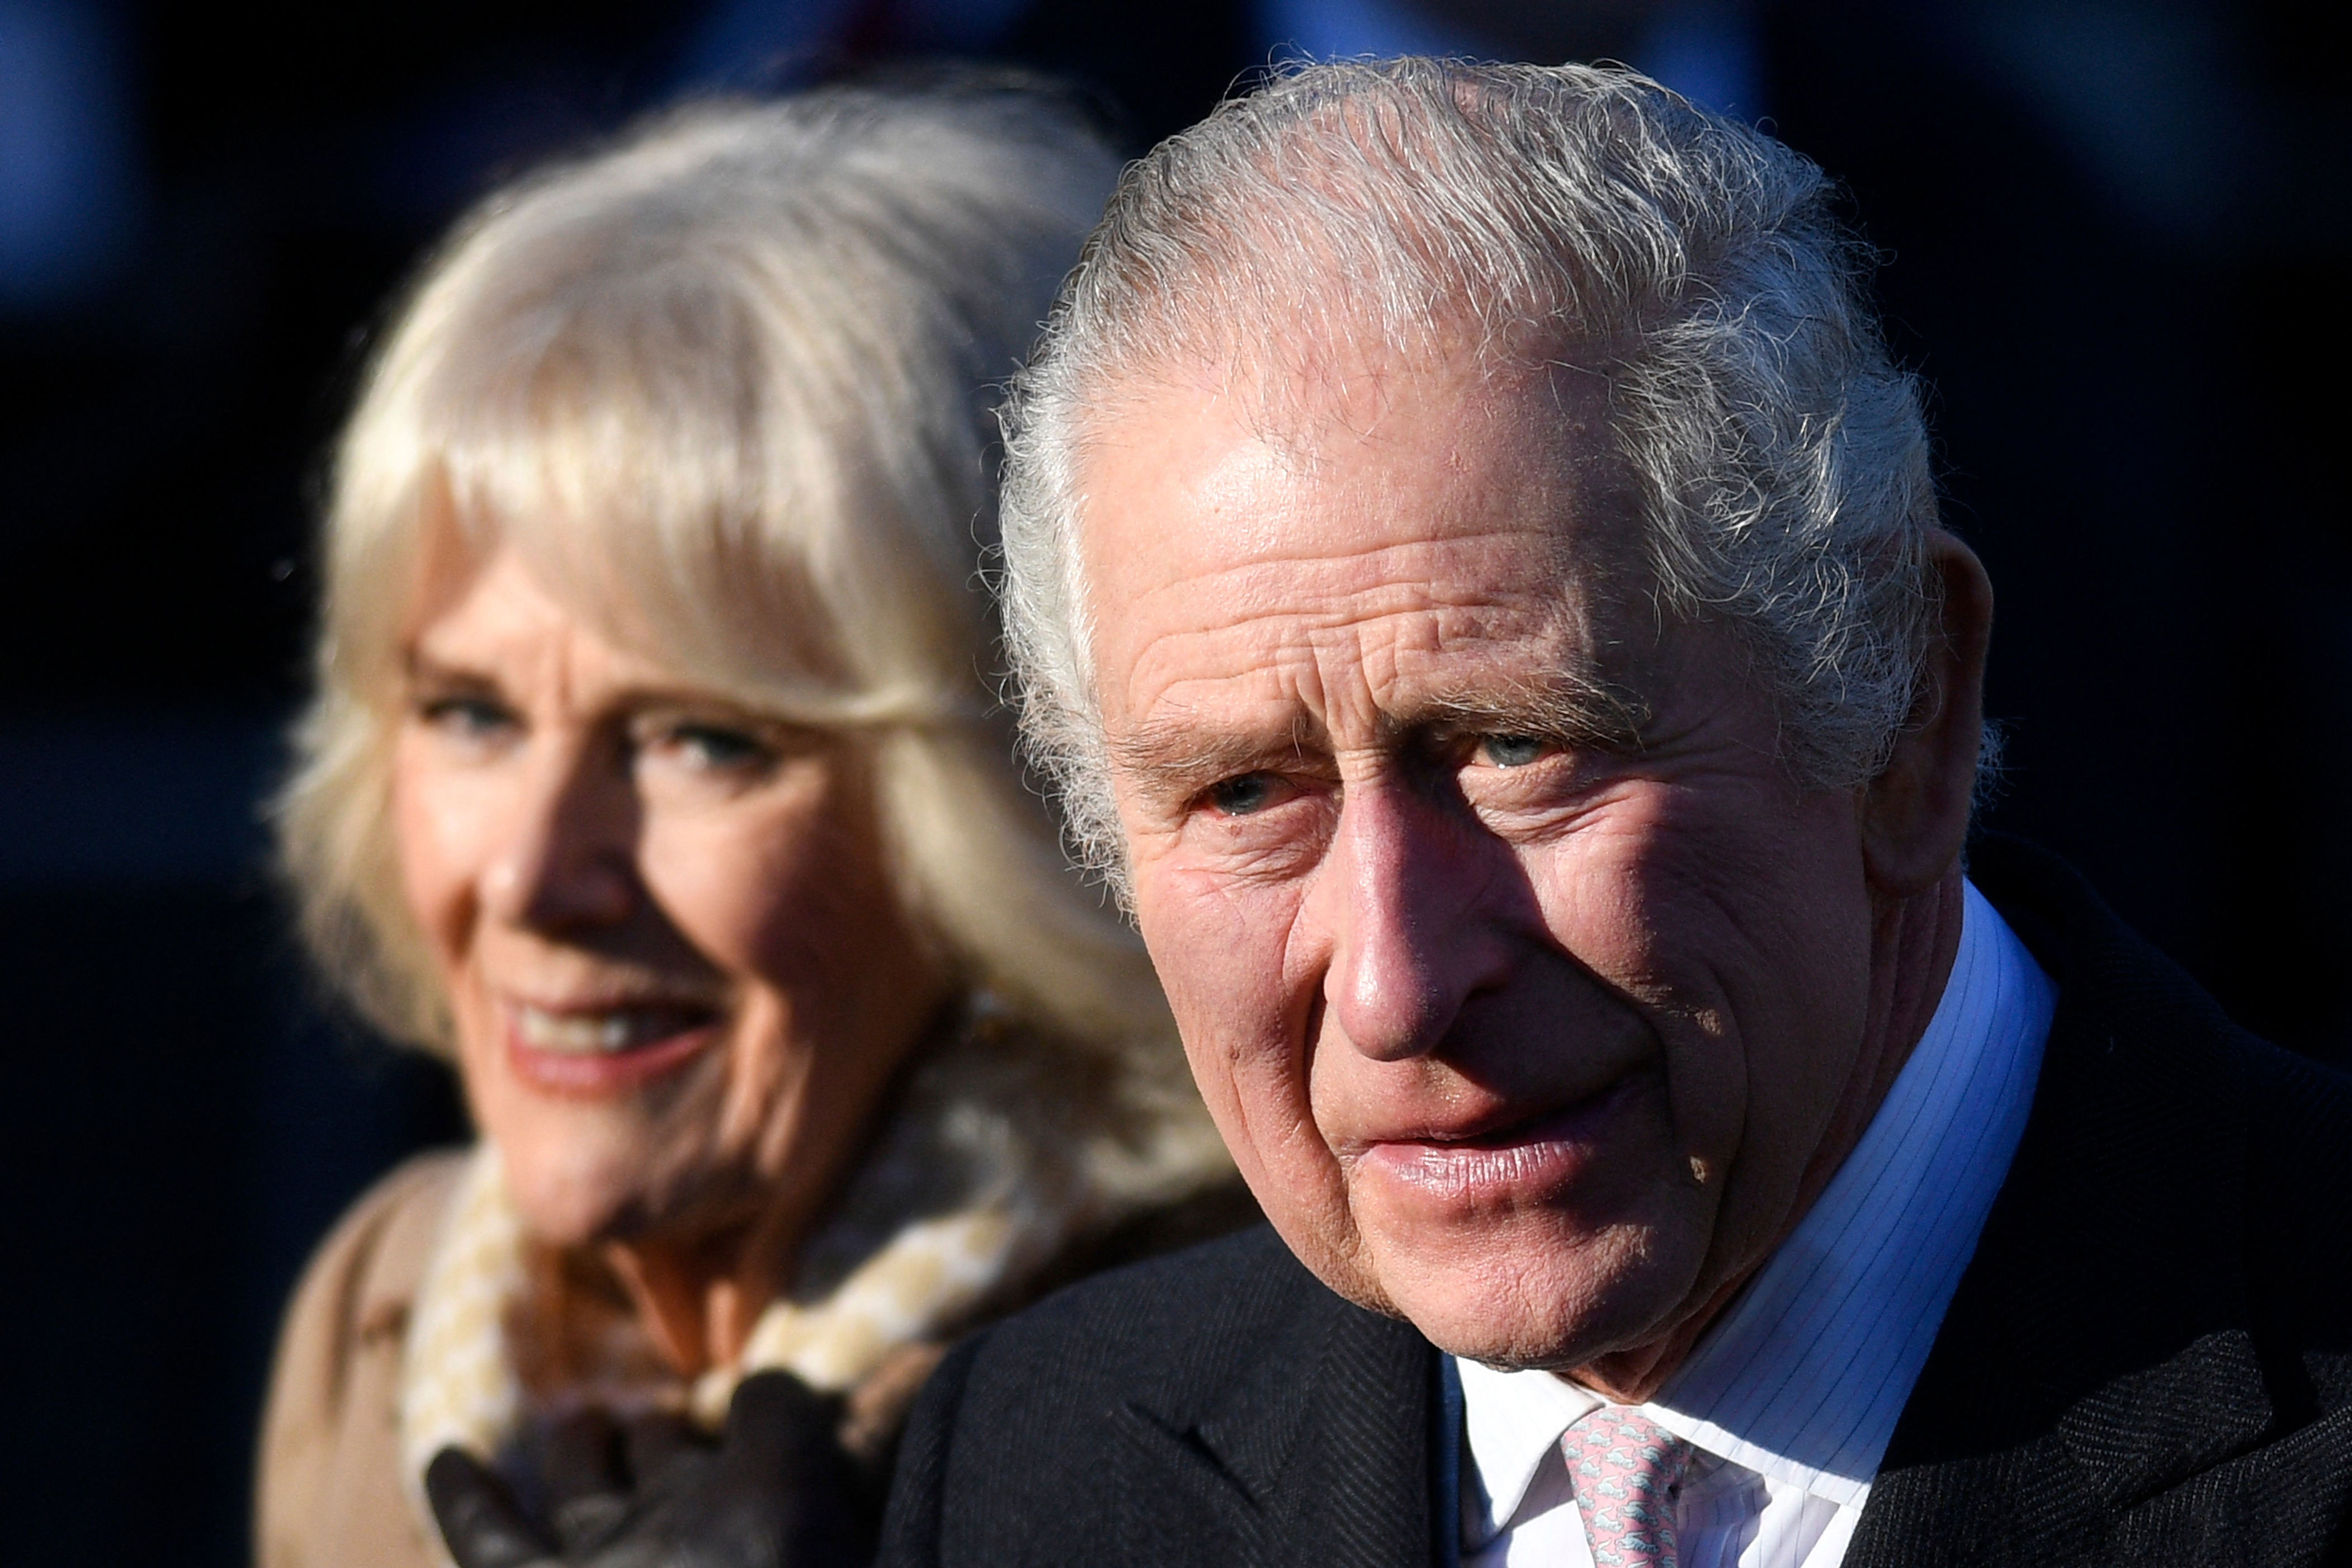 <p>King Charles III and wife Queen Consort Camilla visited Bolton Town Hall in Bolton, England, on Jan. 20, 2023, where they met with representatives from the community. One day later, the palace announced new details about the ceremonial, celebratory and community events that will take place over the new monarch's coronation weekend on May 6-8, 2023, including a gathering of royal family members on the Buckingham Palace balcony following Charles' and Camilla's coronation at Westminster Abbey, a big coronation concert with global music icons at Windsor Castle, a Coronation Big Lunch -- where neighbors and communities will be invited to share food and fun together across the country -- and the Big Help Out, which will see the palace encouraging people to volunteer.</p>